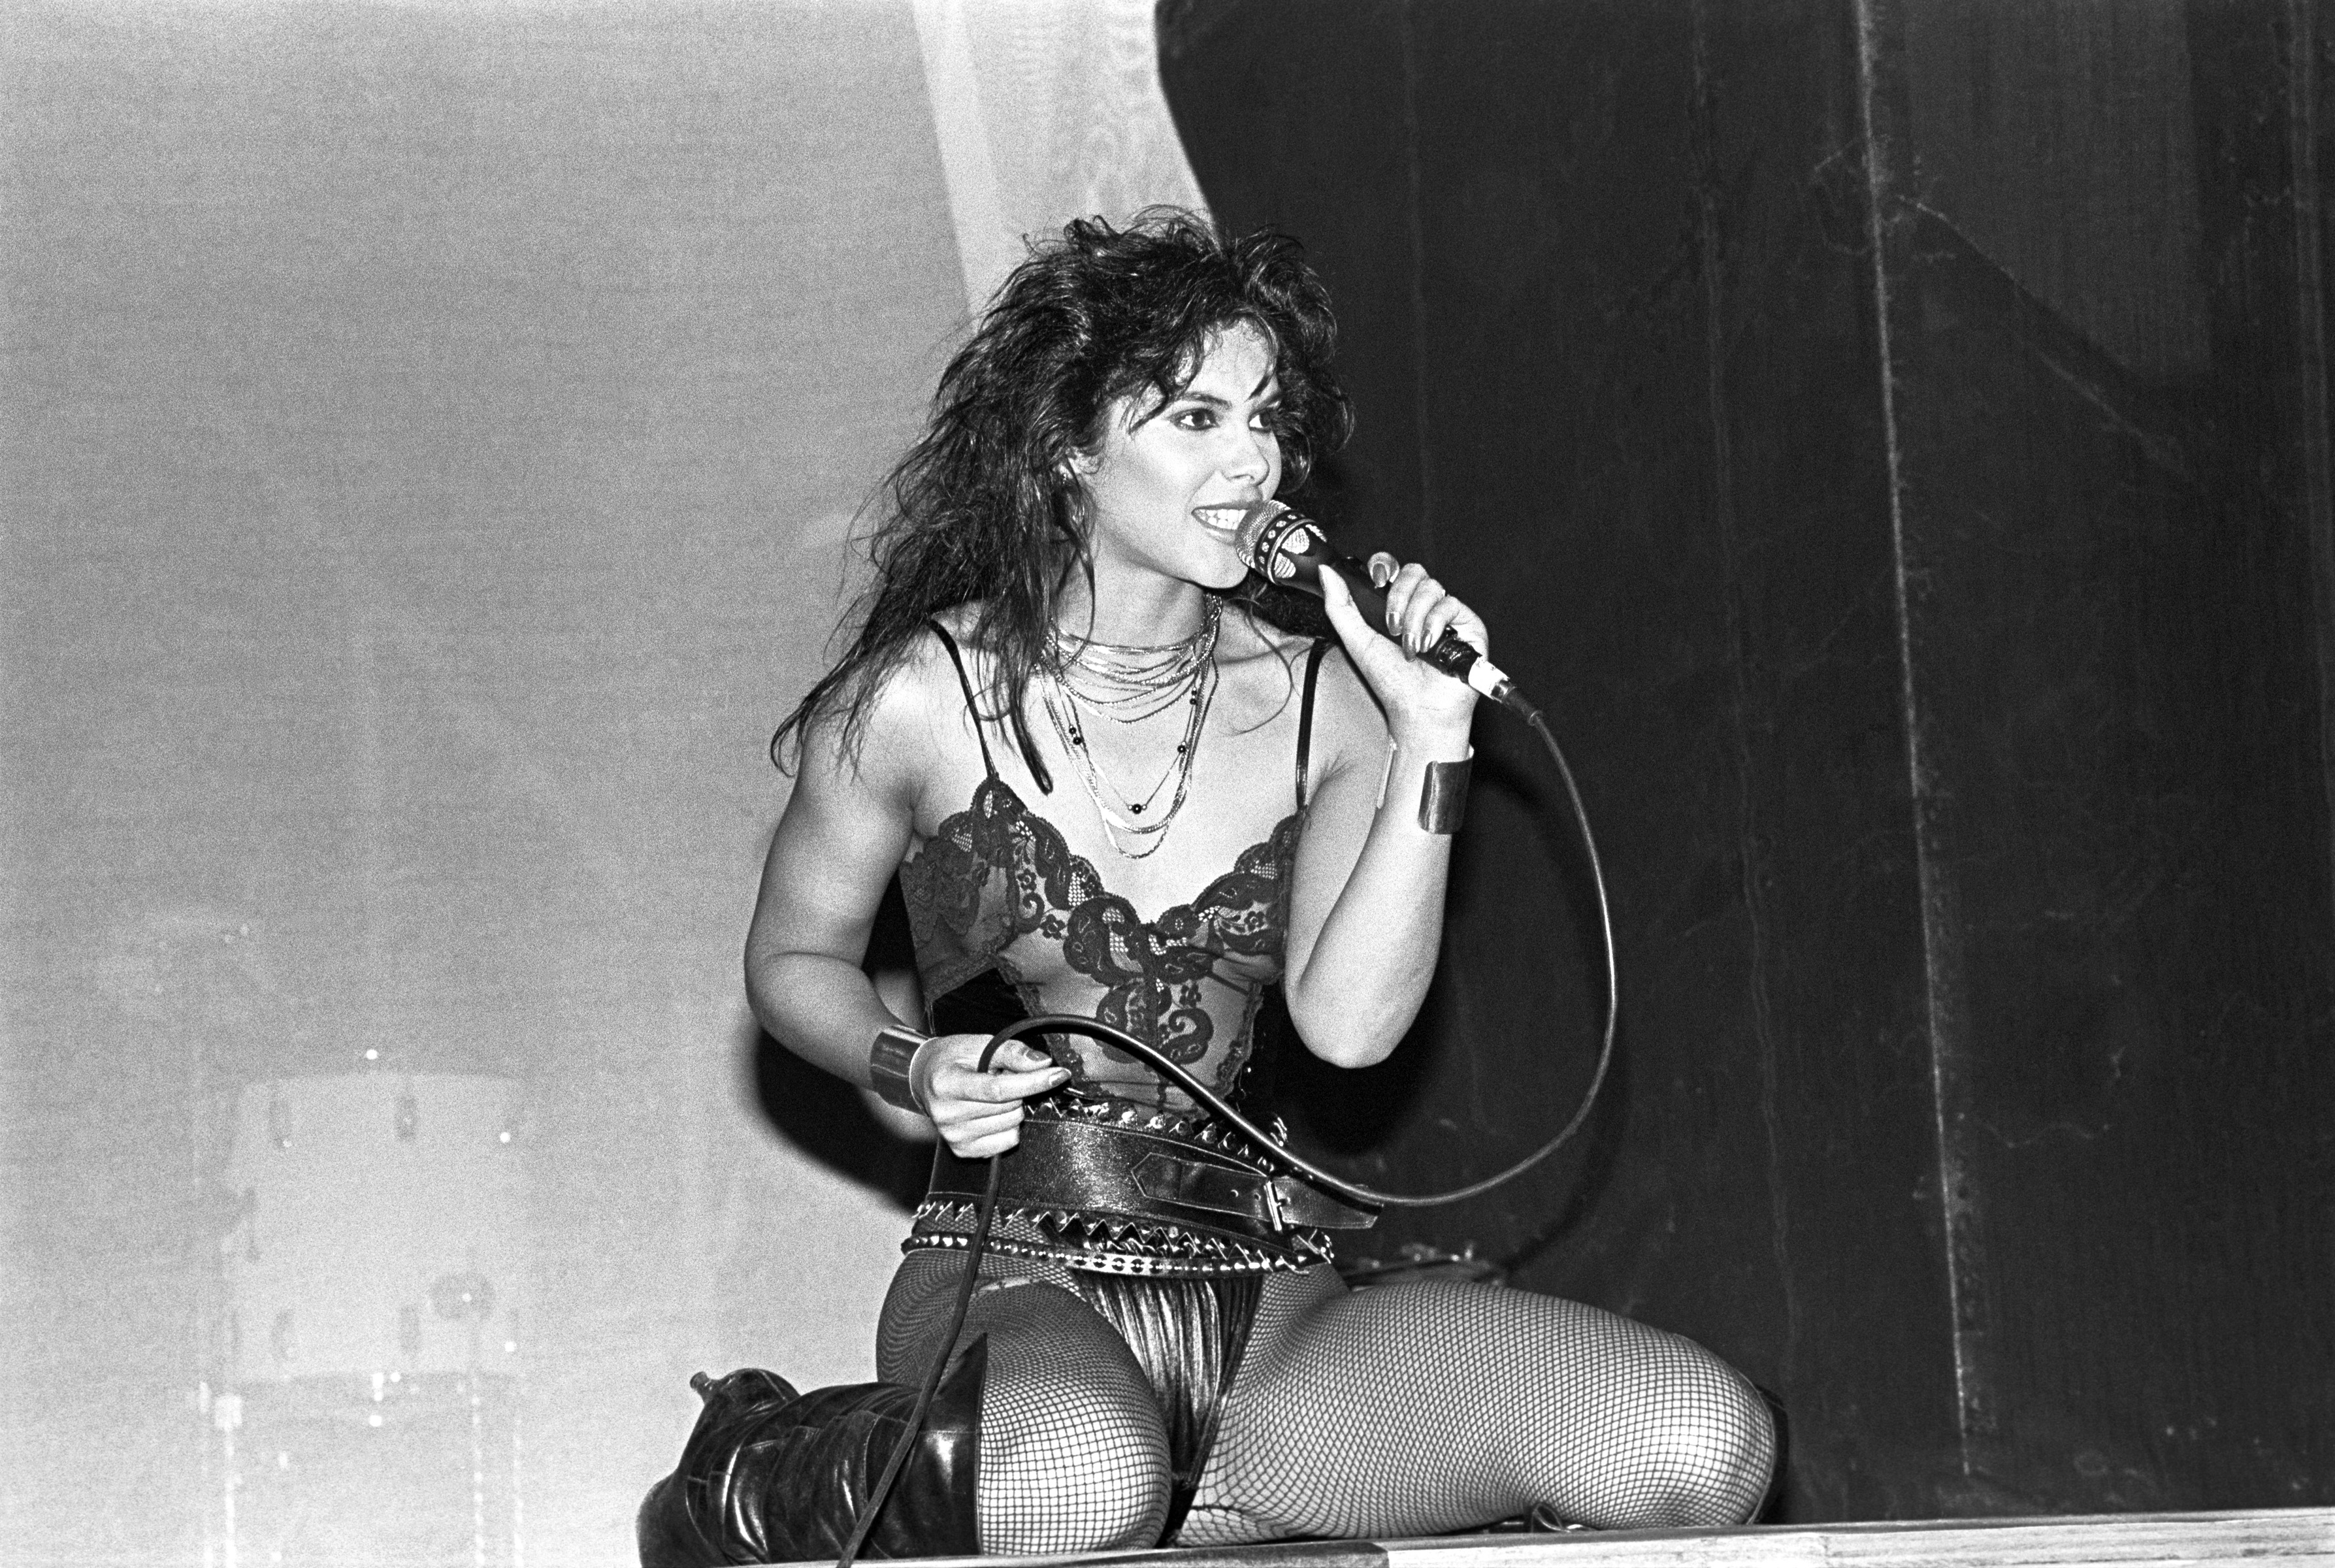 Denise Matthews, Singer and Prince Affiliate Known as Vanity, Dead at 57